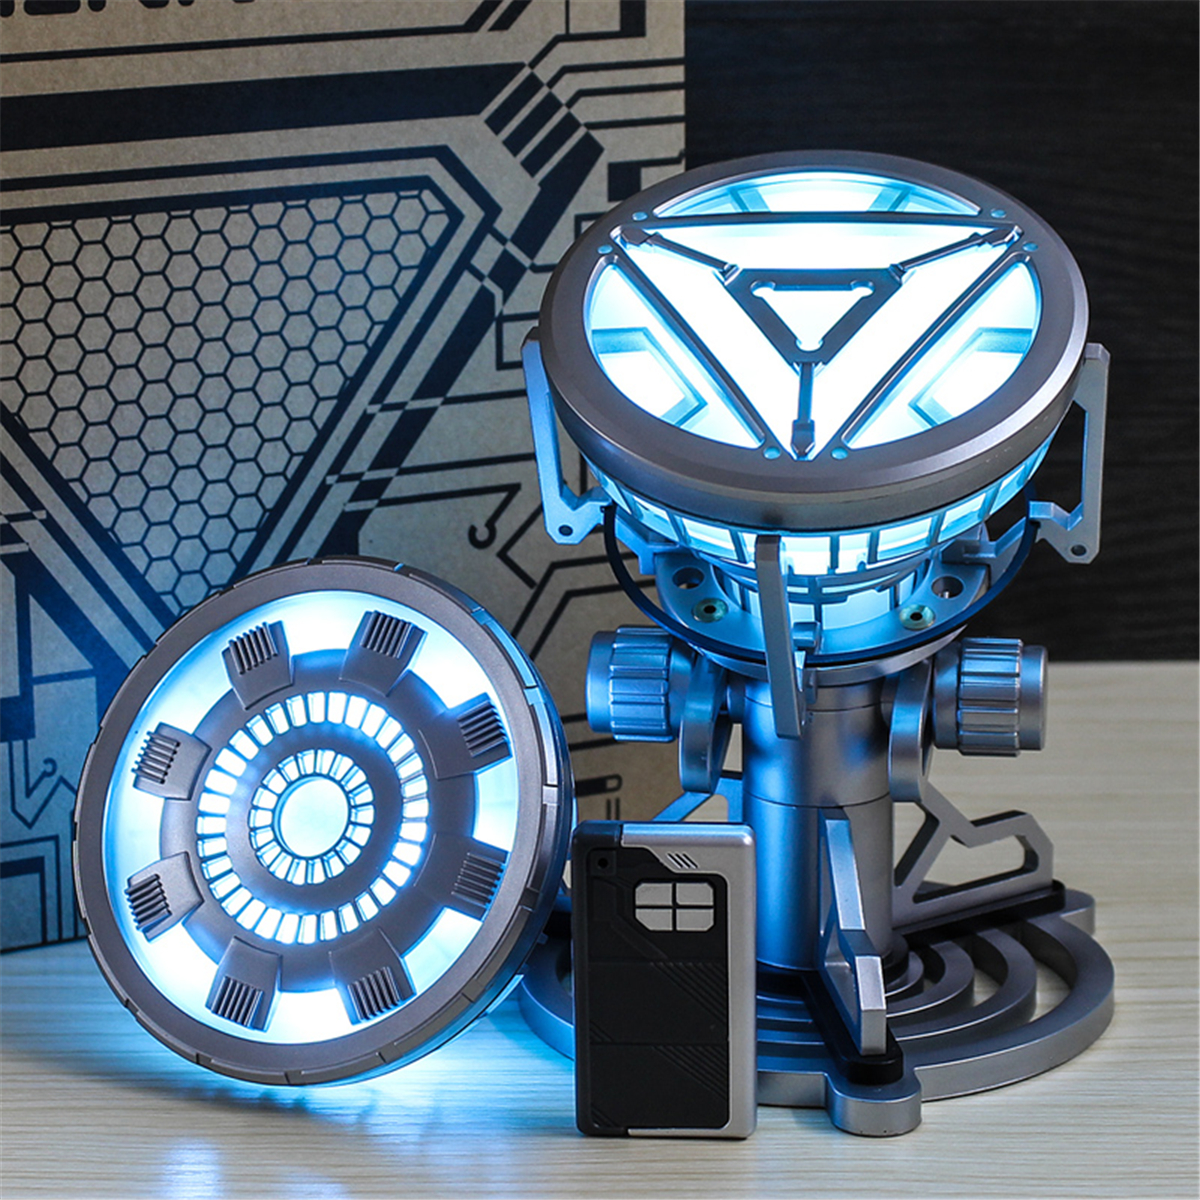 1:1 ARC REACTOR LED Chest Heart Light-up Lamp Movie ABC Props Model Kit Science Toy 16